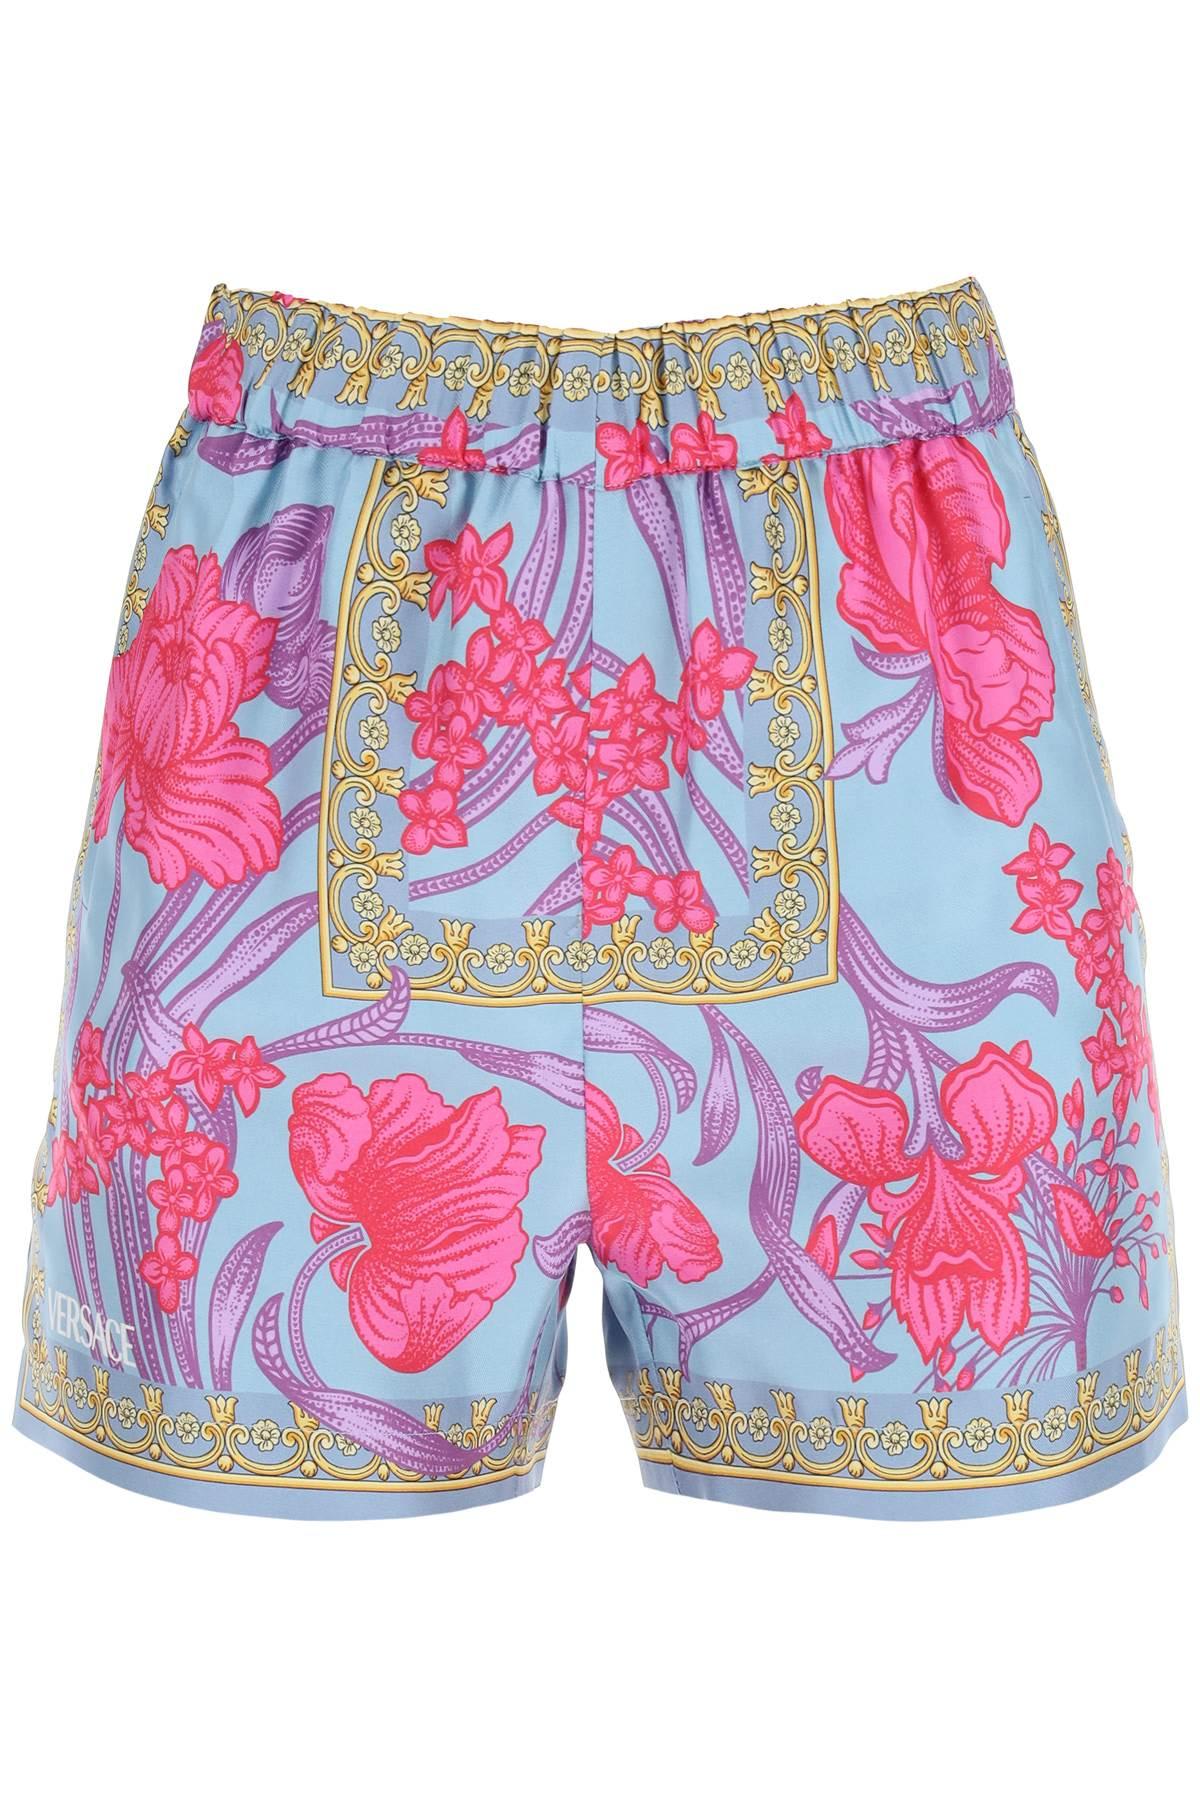 VERSACE ALLOVER FLORAL PRINTED HIGH WAIST SHORTS